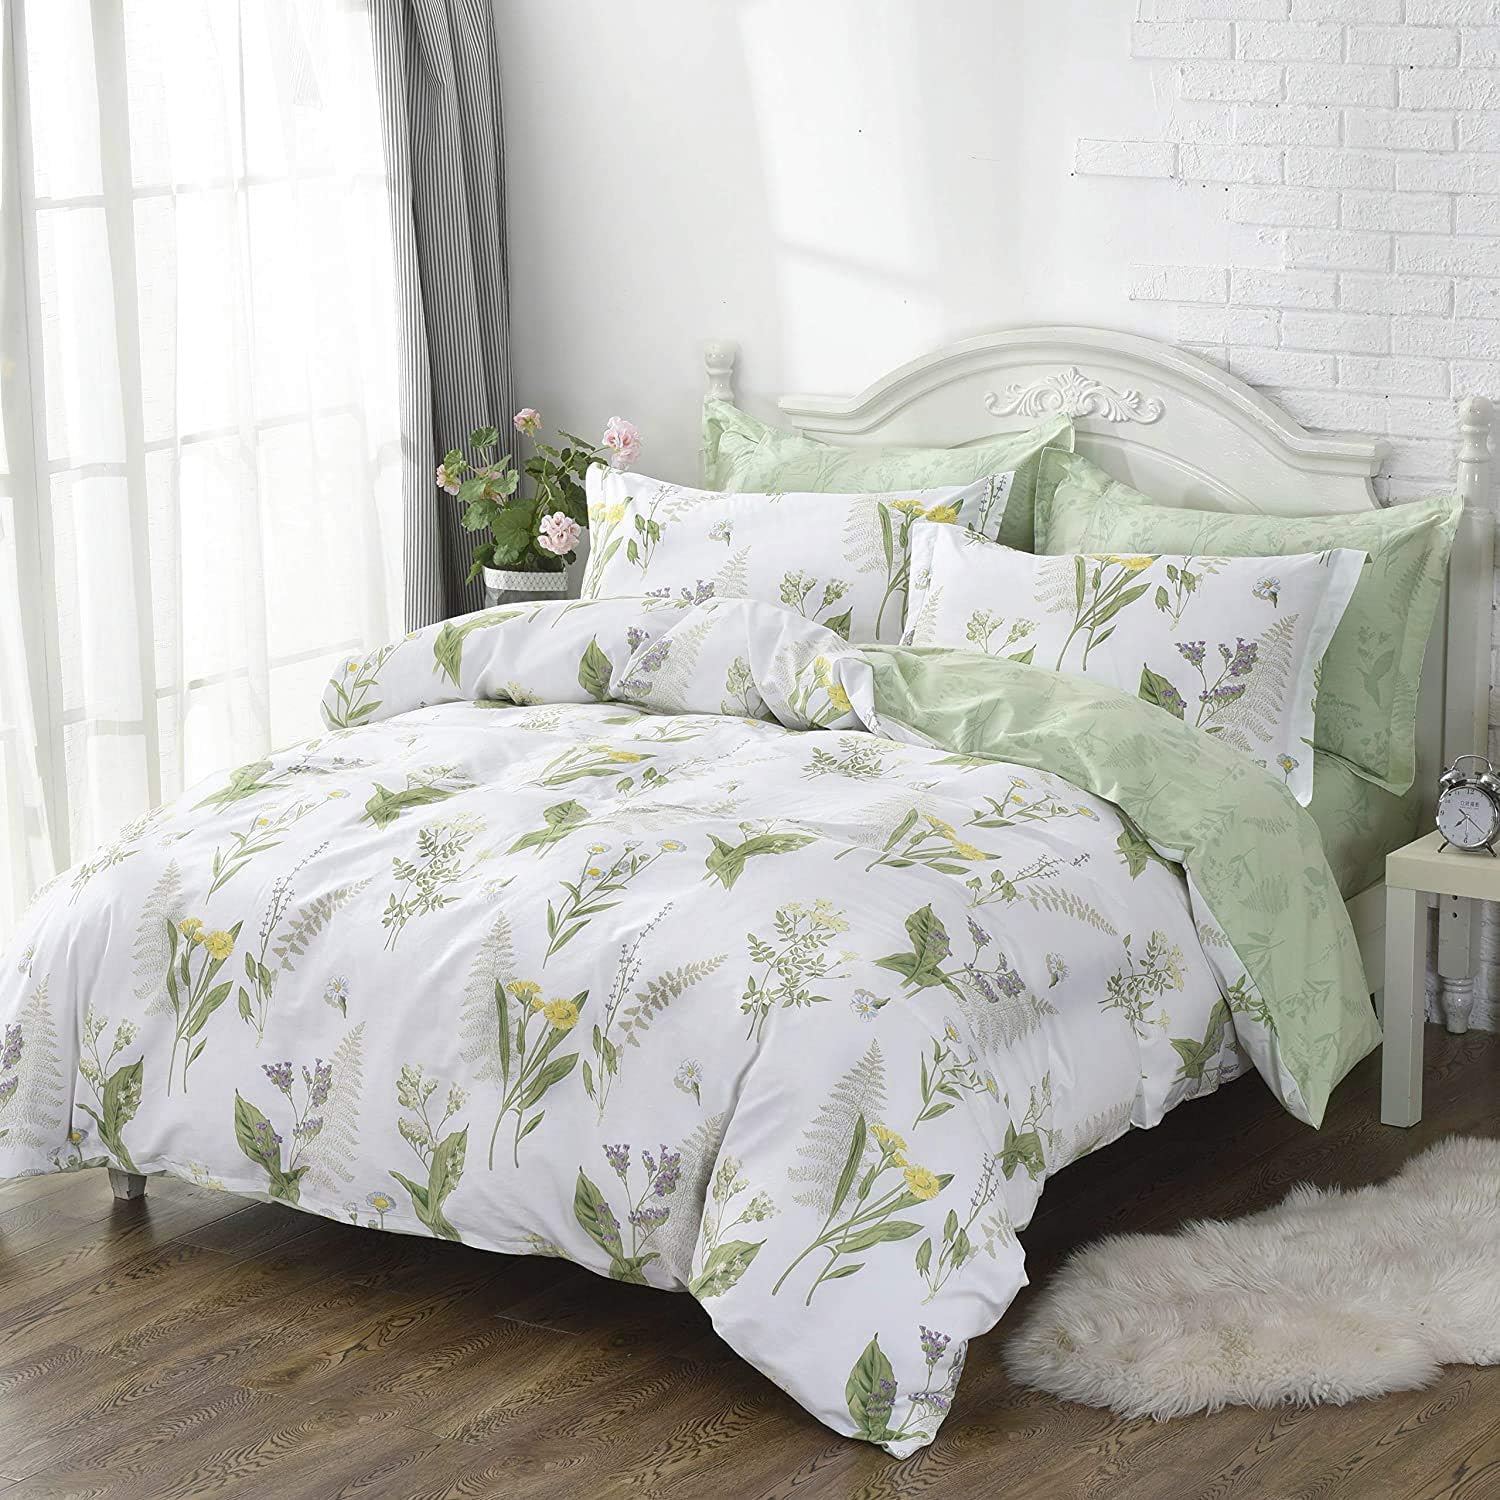 FADFAY Duvet Cover Set Queen Shabby Green Daisy and Lavender Flowers 100% Cotton with Hidden Zipper Closure 3-Piece:1 Duvet Cover & 2 Pillowcases Queen Size